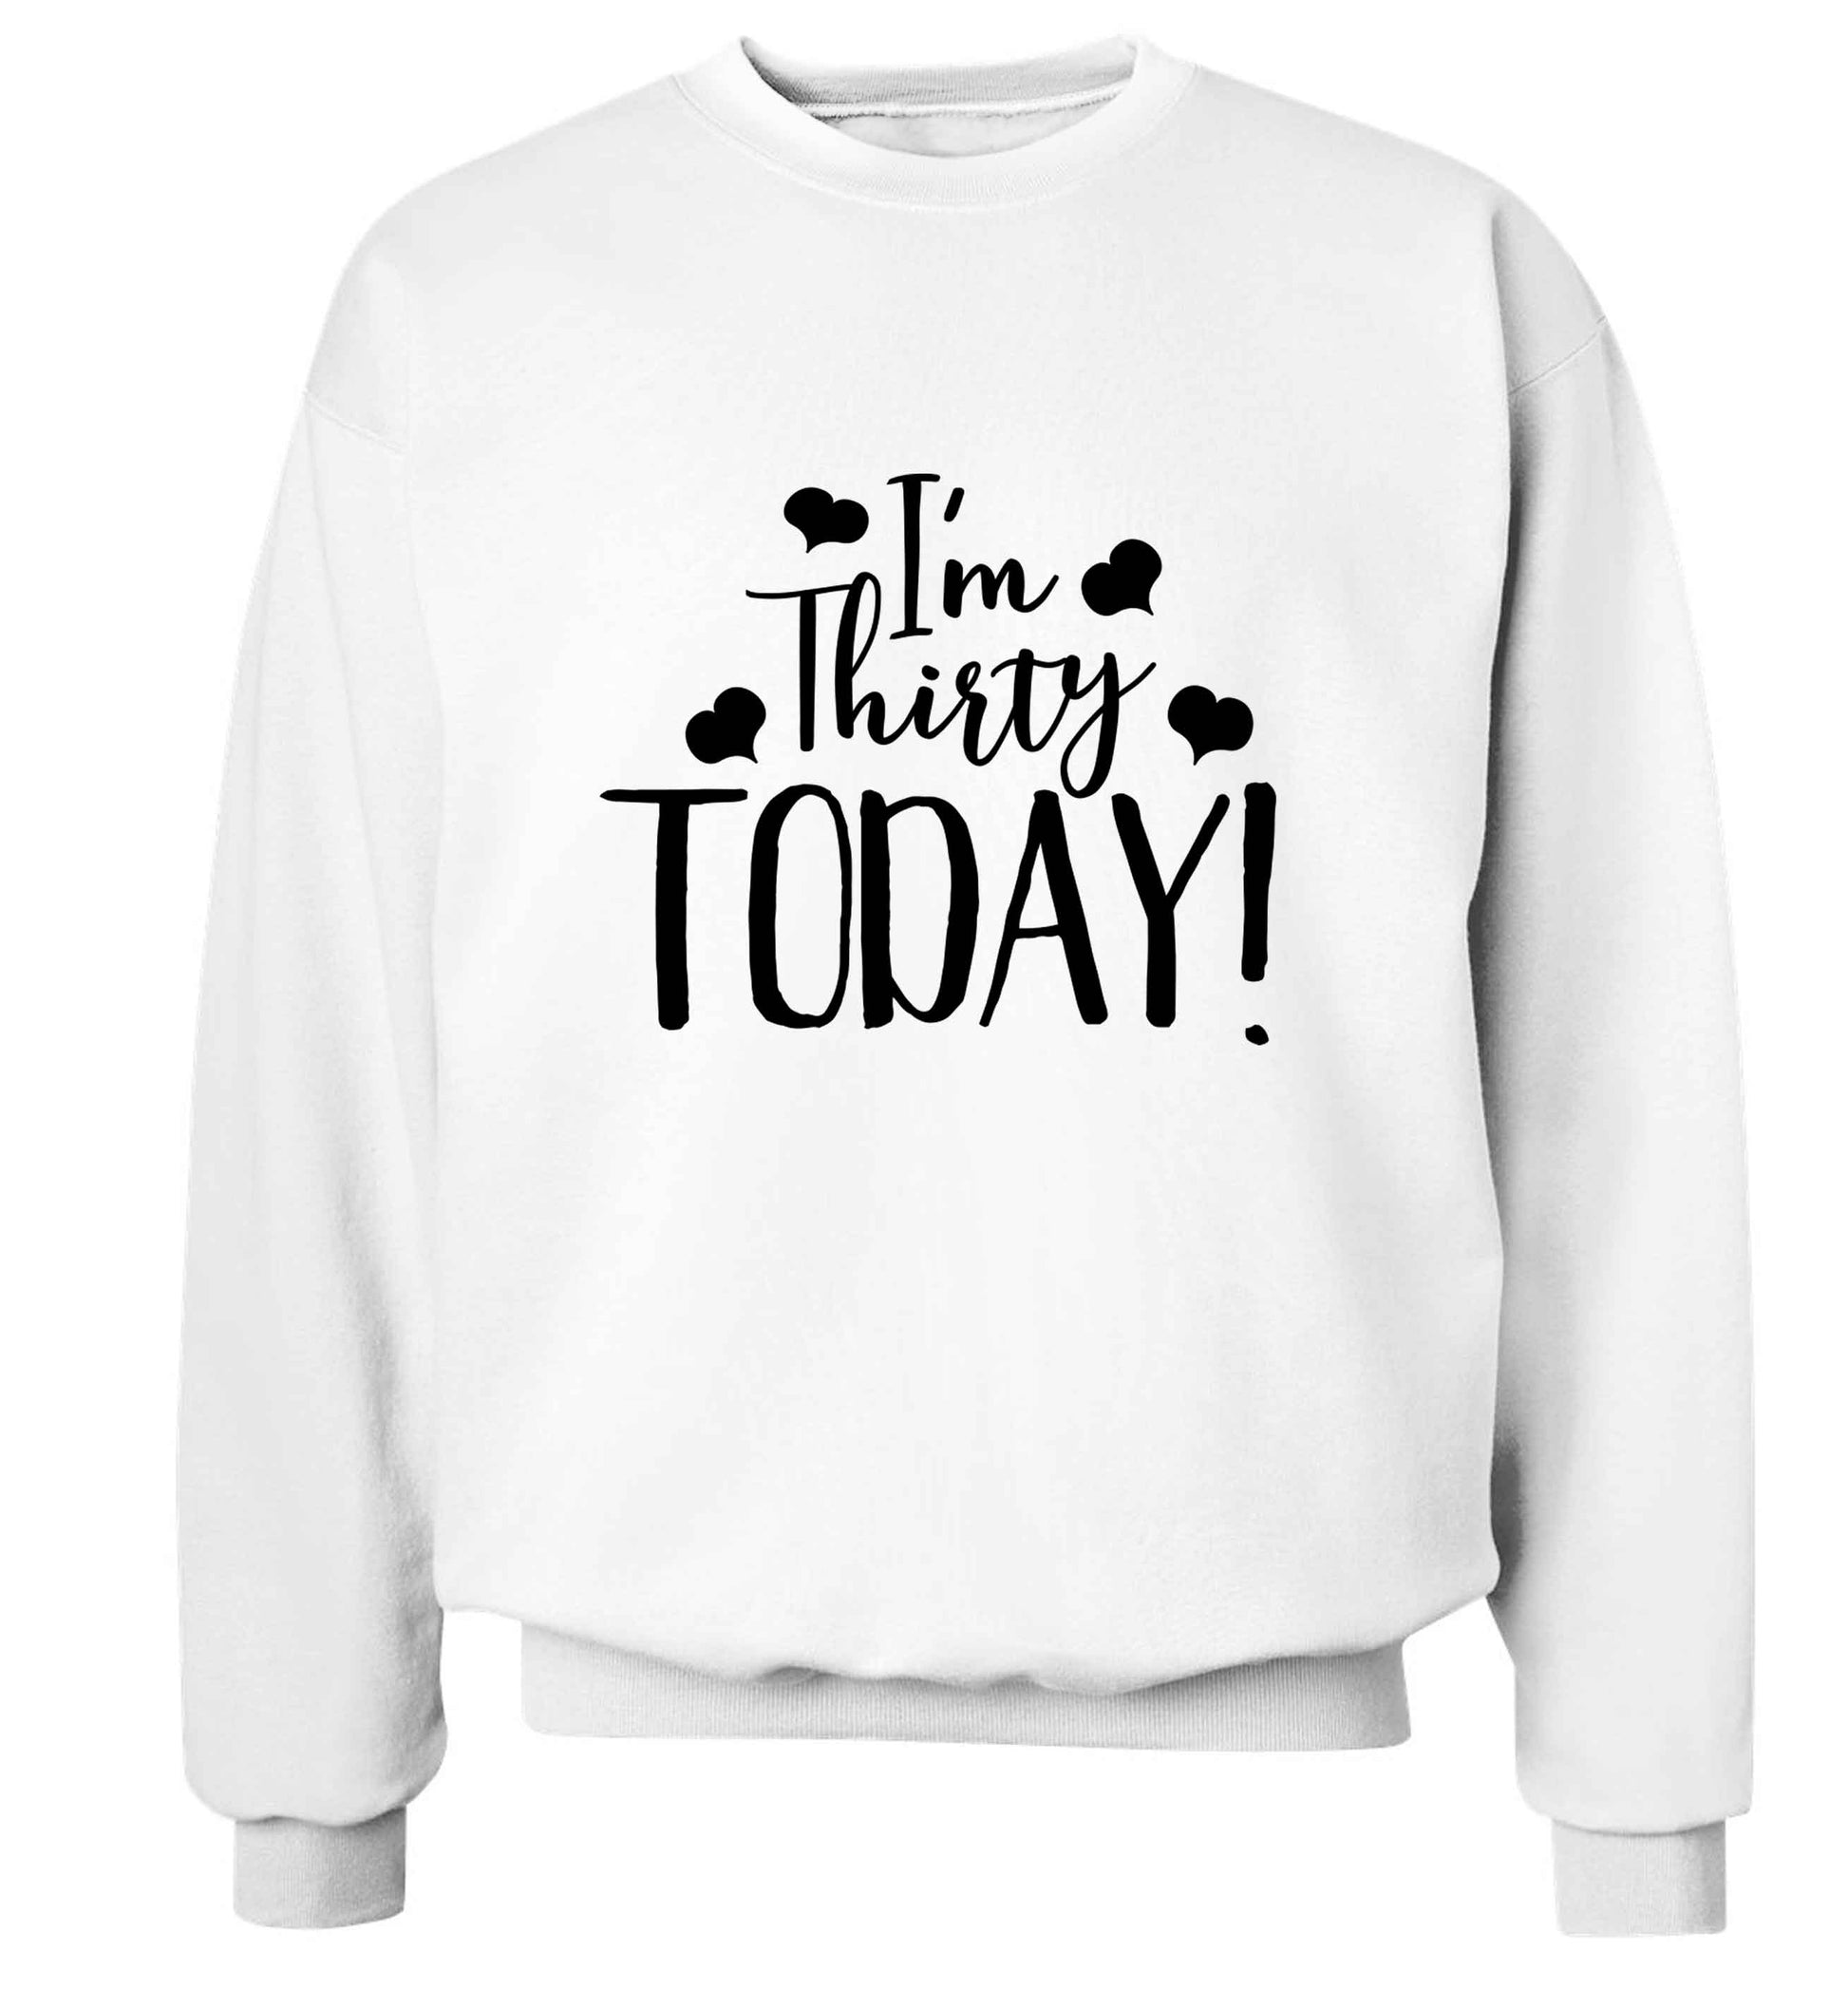 I'm thirty today! adult's unisex white sweater 2XL